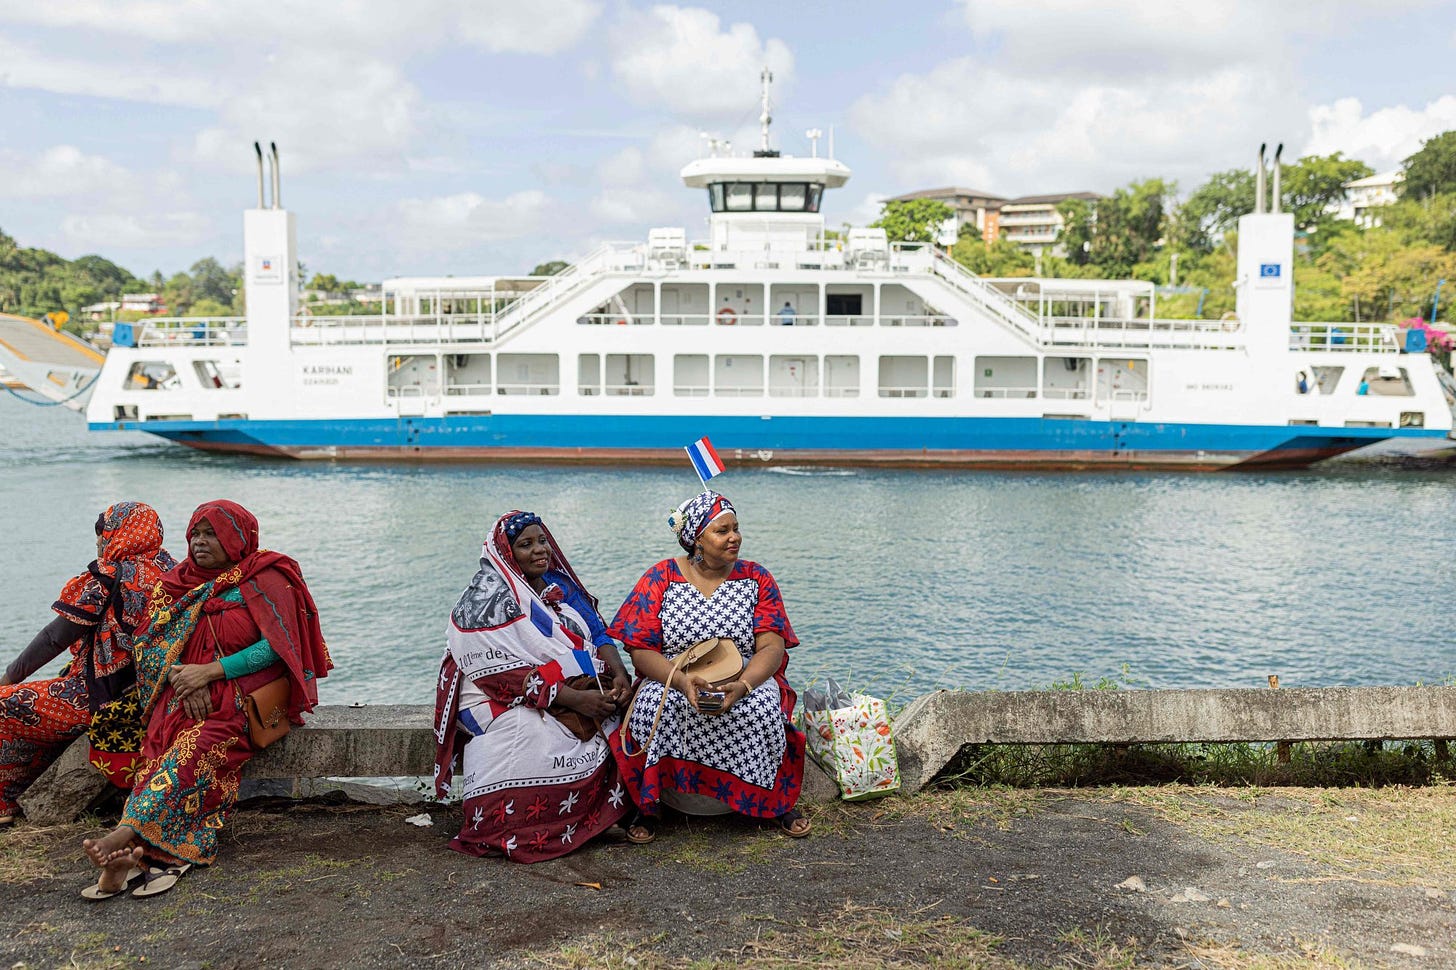 Migrant women on the French island of Mayotte have settled in slums and the government wants to demolish their makeshift housing. Photo: AFP